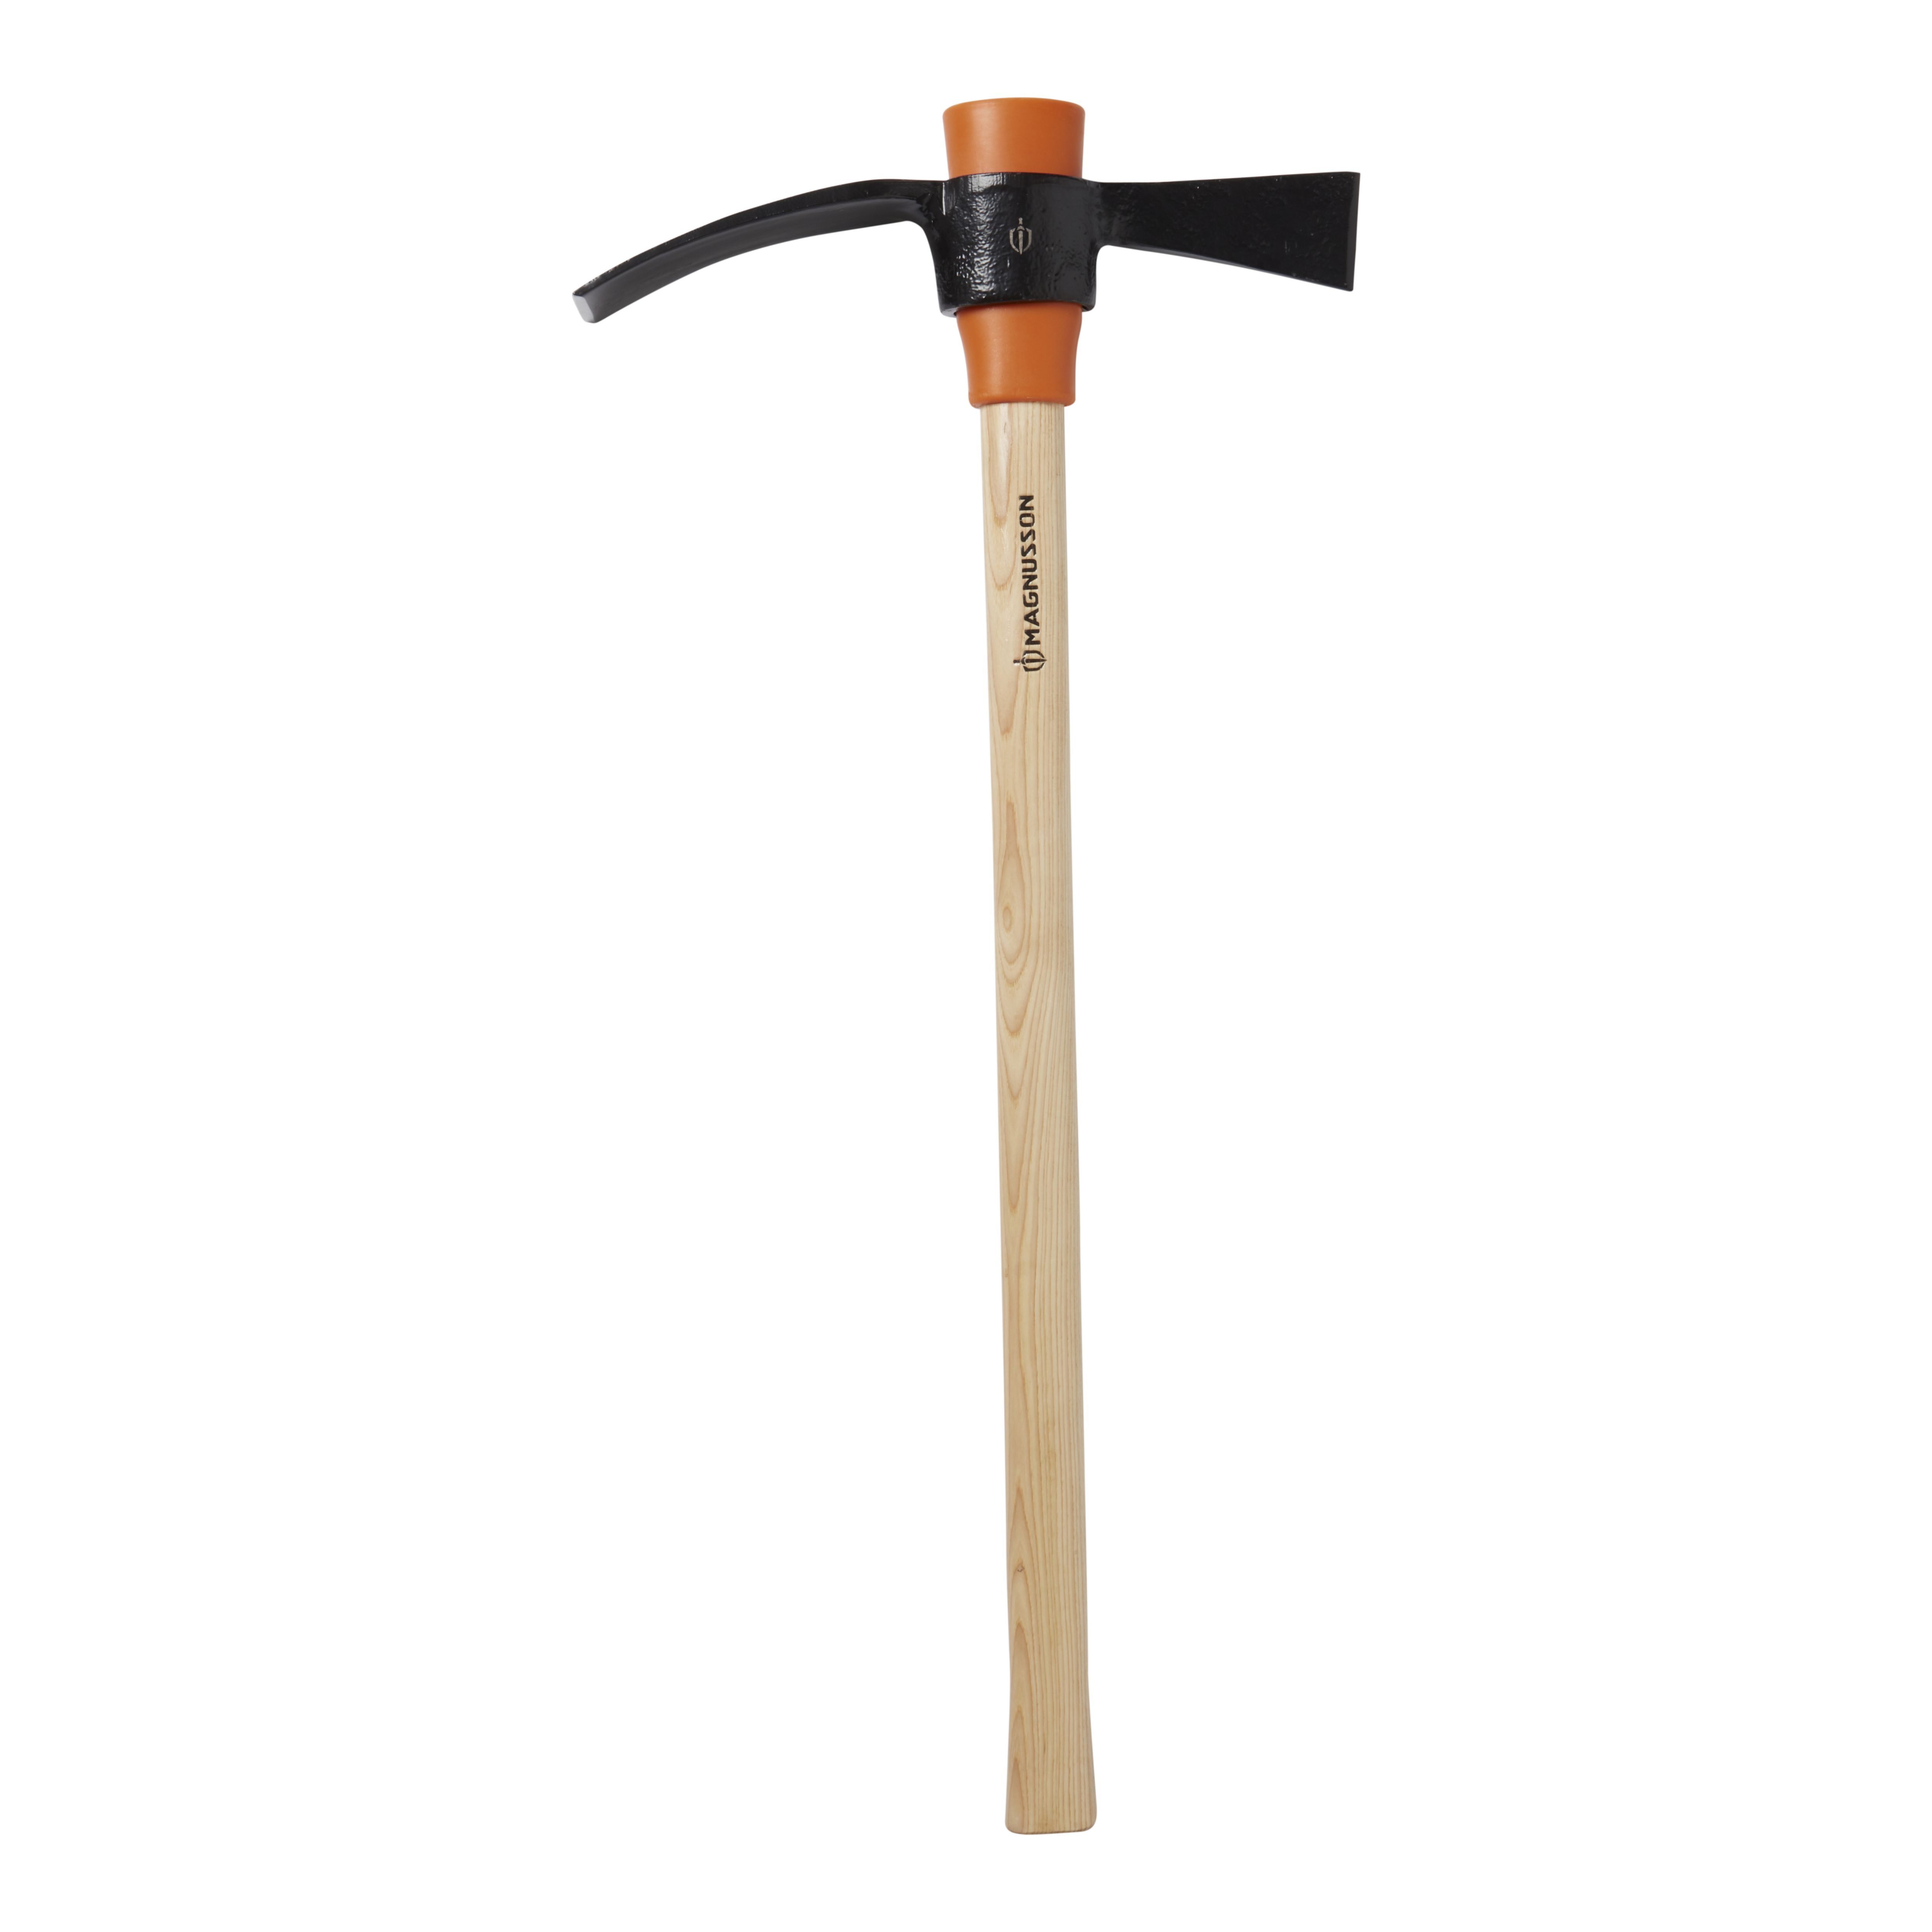 Magnusson 2.2kg Mattock with Hickory handle